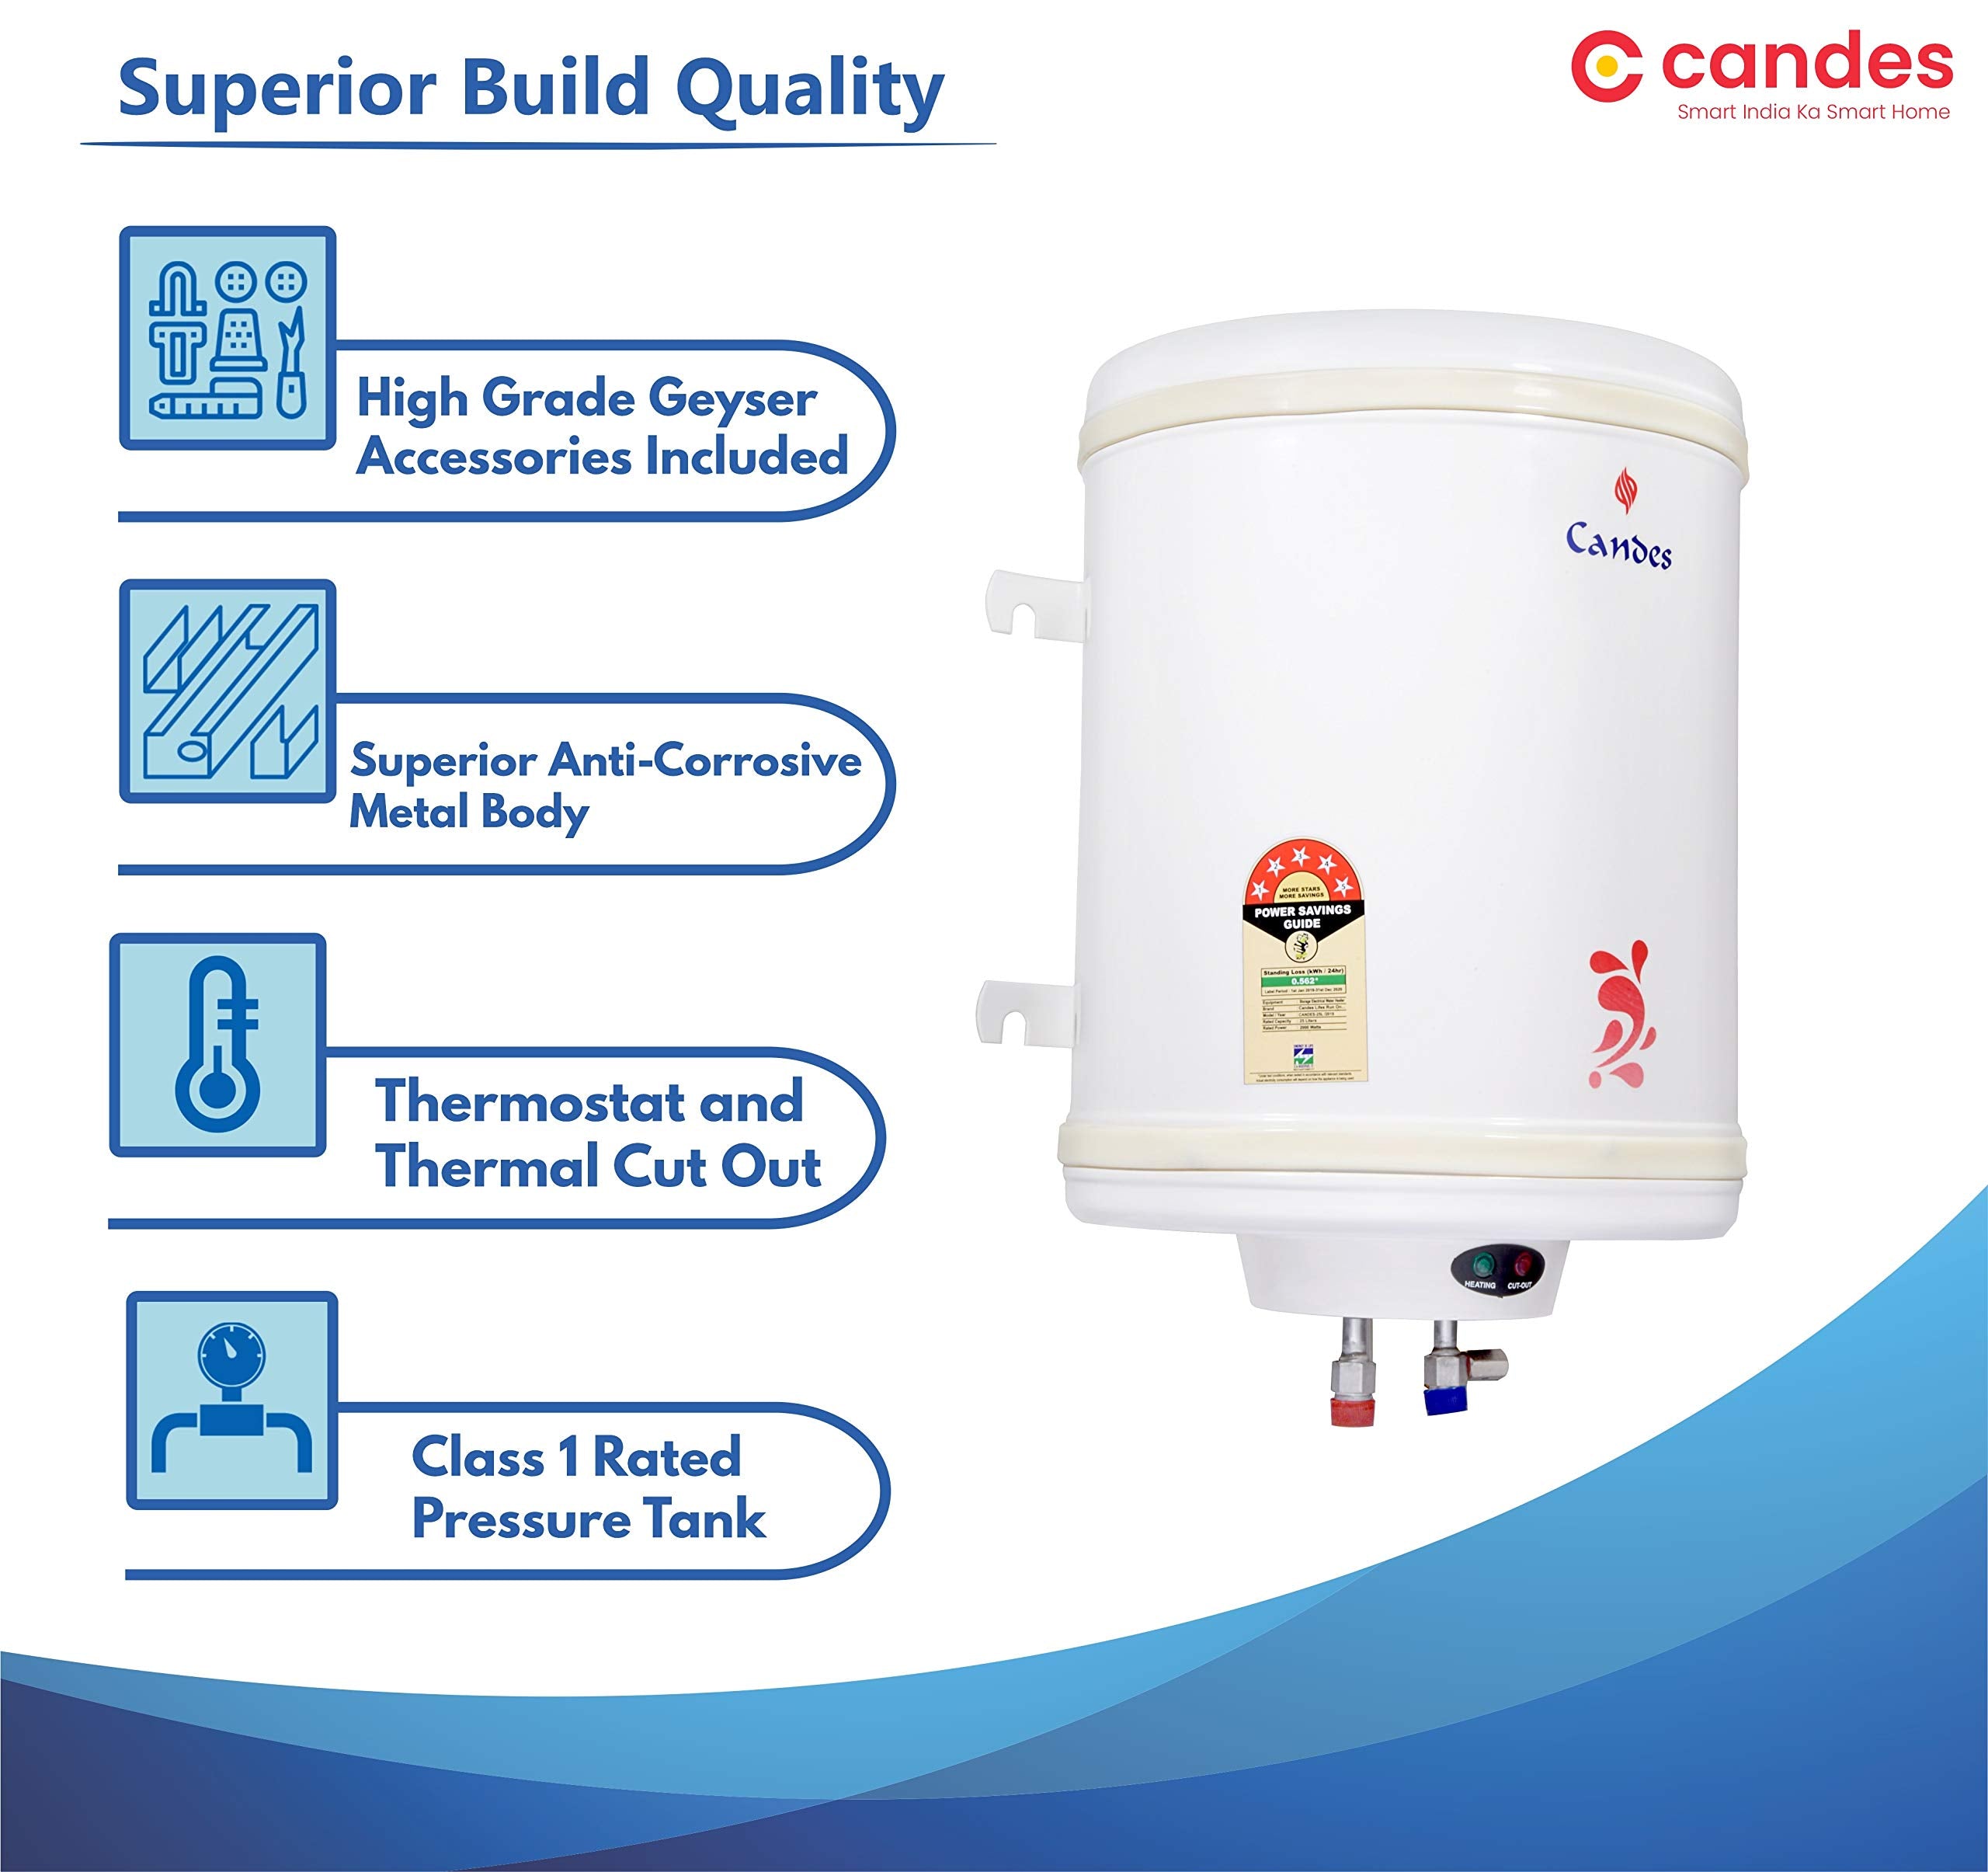 Candes 35 Litre Automatic Storage ISI Approved Vertical Electric Water Heater (Geyser) 5 Star Rated with Installation Kit & Special Anti Rust Body, (Ivory) (2000 W)